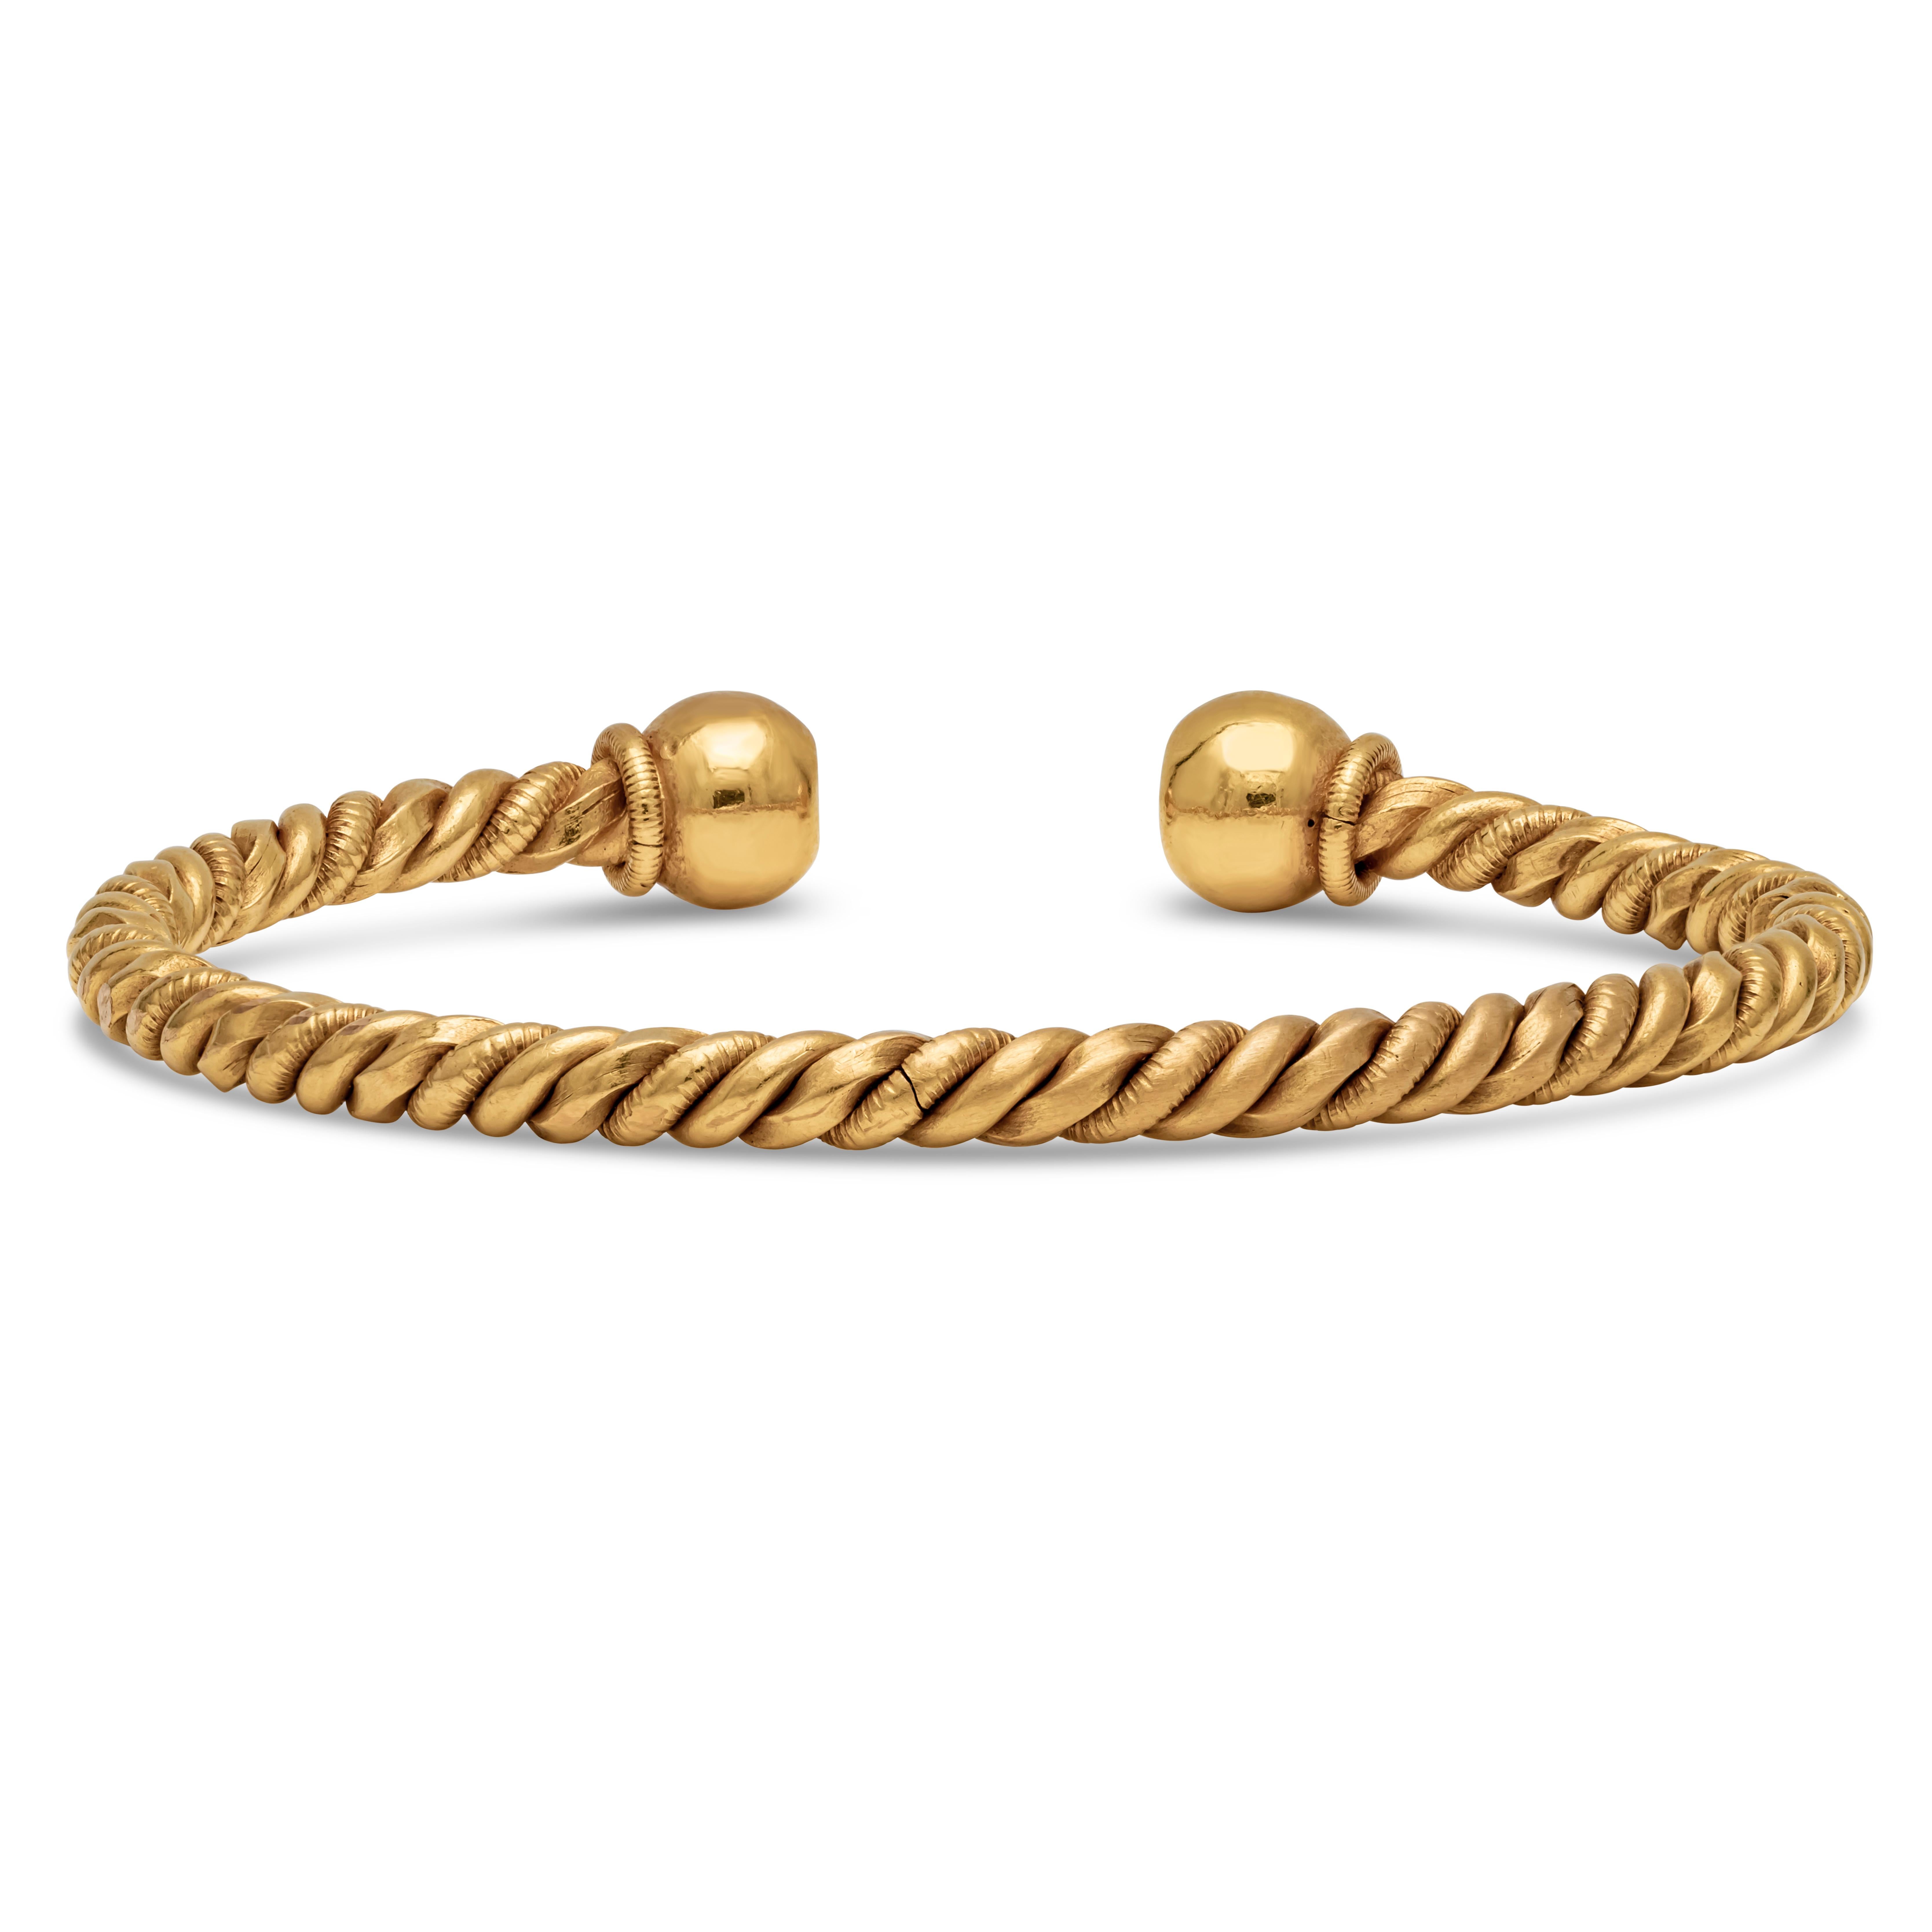 Antique 20K Yellow Gold Braided Hand-Made Bangle Bracelet In Excellent Condition For Sale In New York, NY